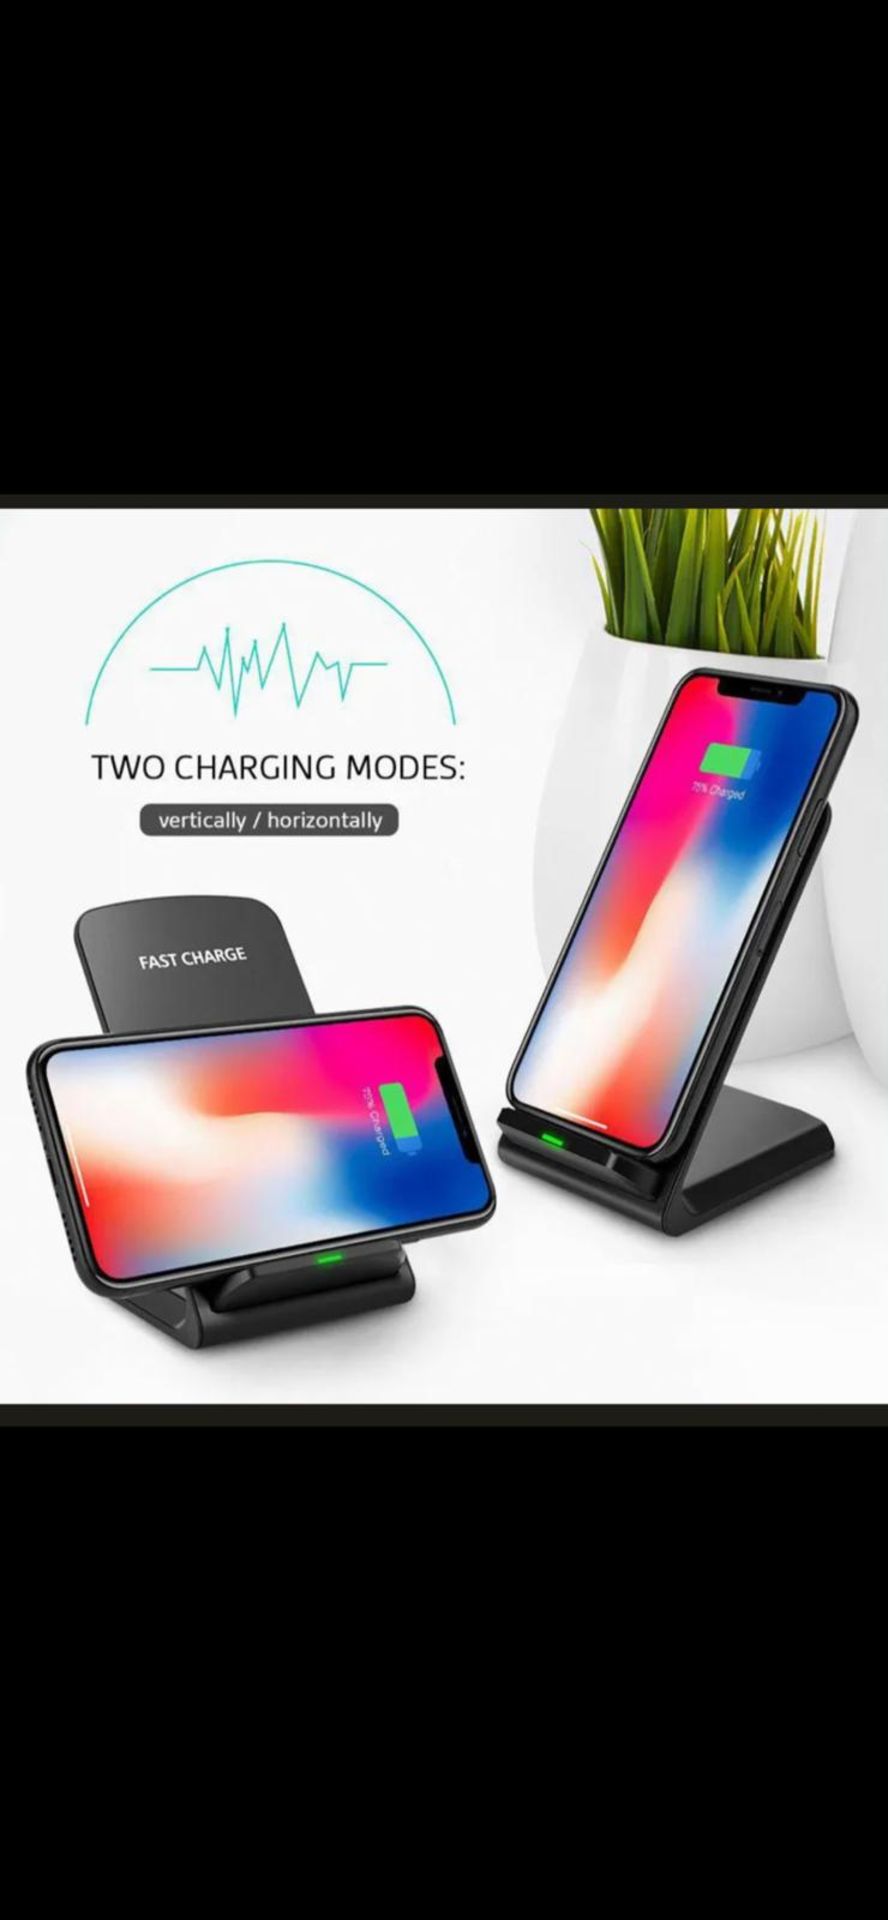 10 x Quick Charge Wireless Charger 2.0 Two Coil - (NEW) - RRP Â£179 !